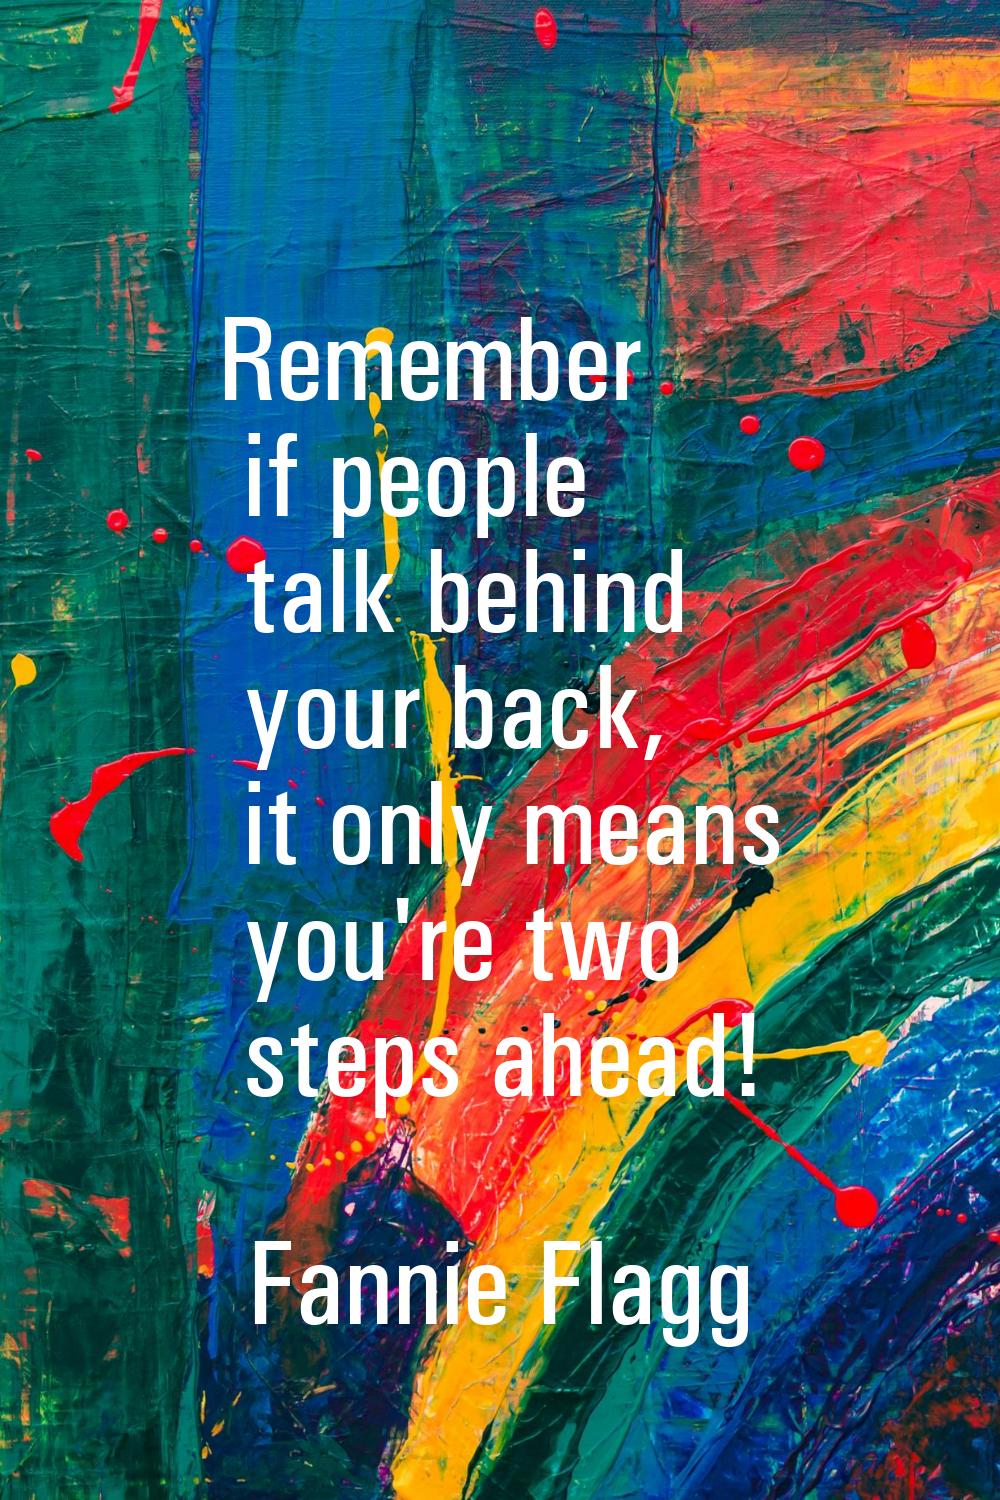 Remember if people talk behind your back, it only means you're two steps ahead!